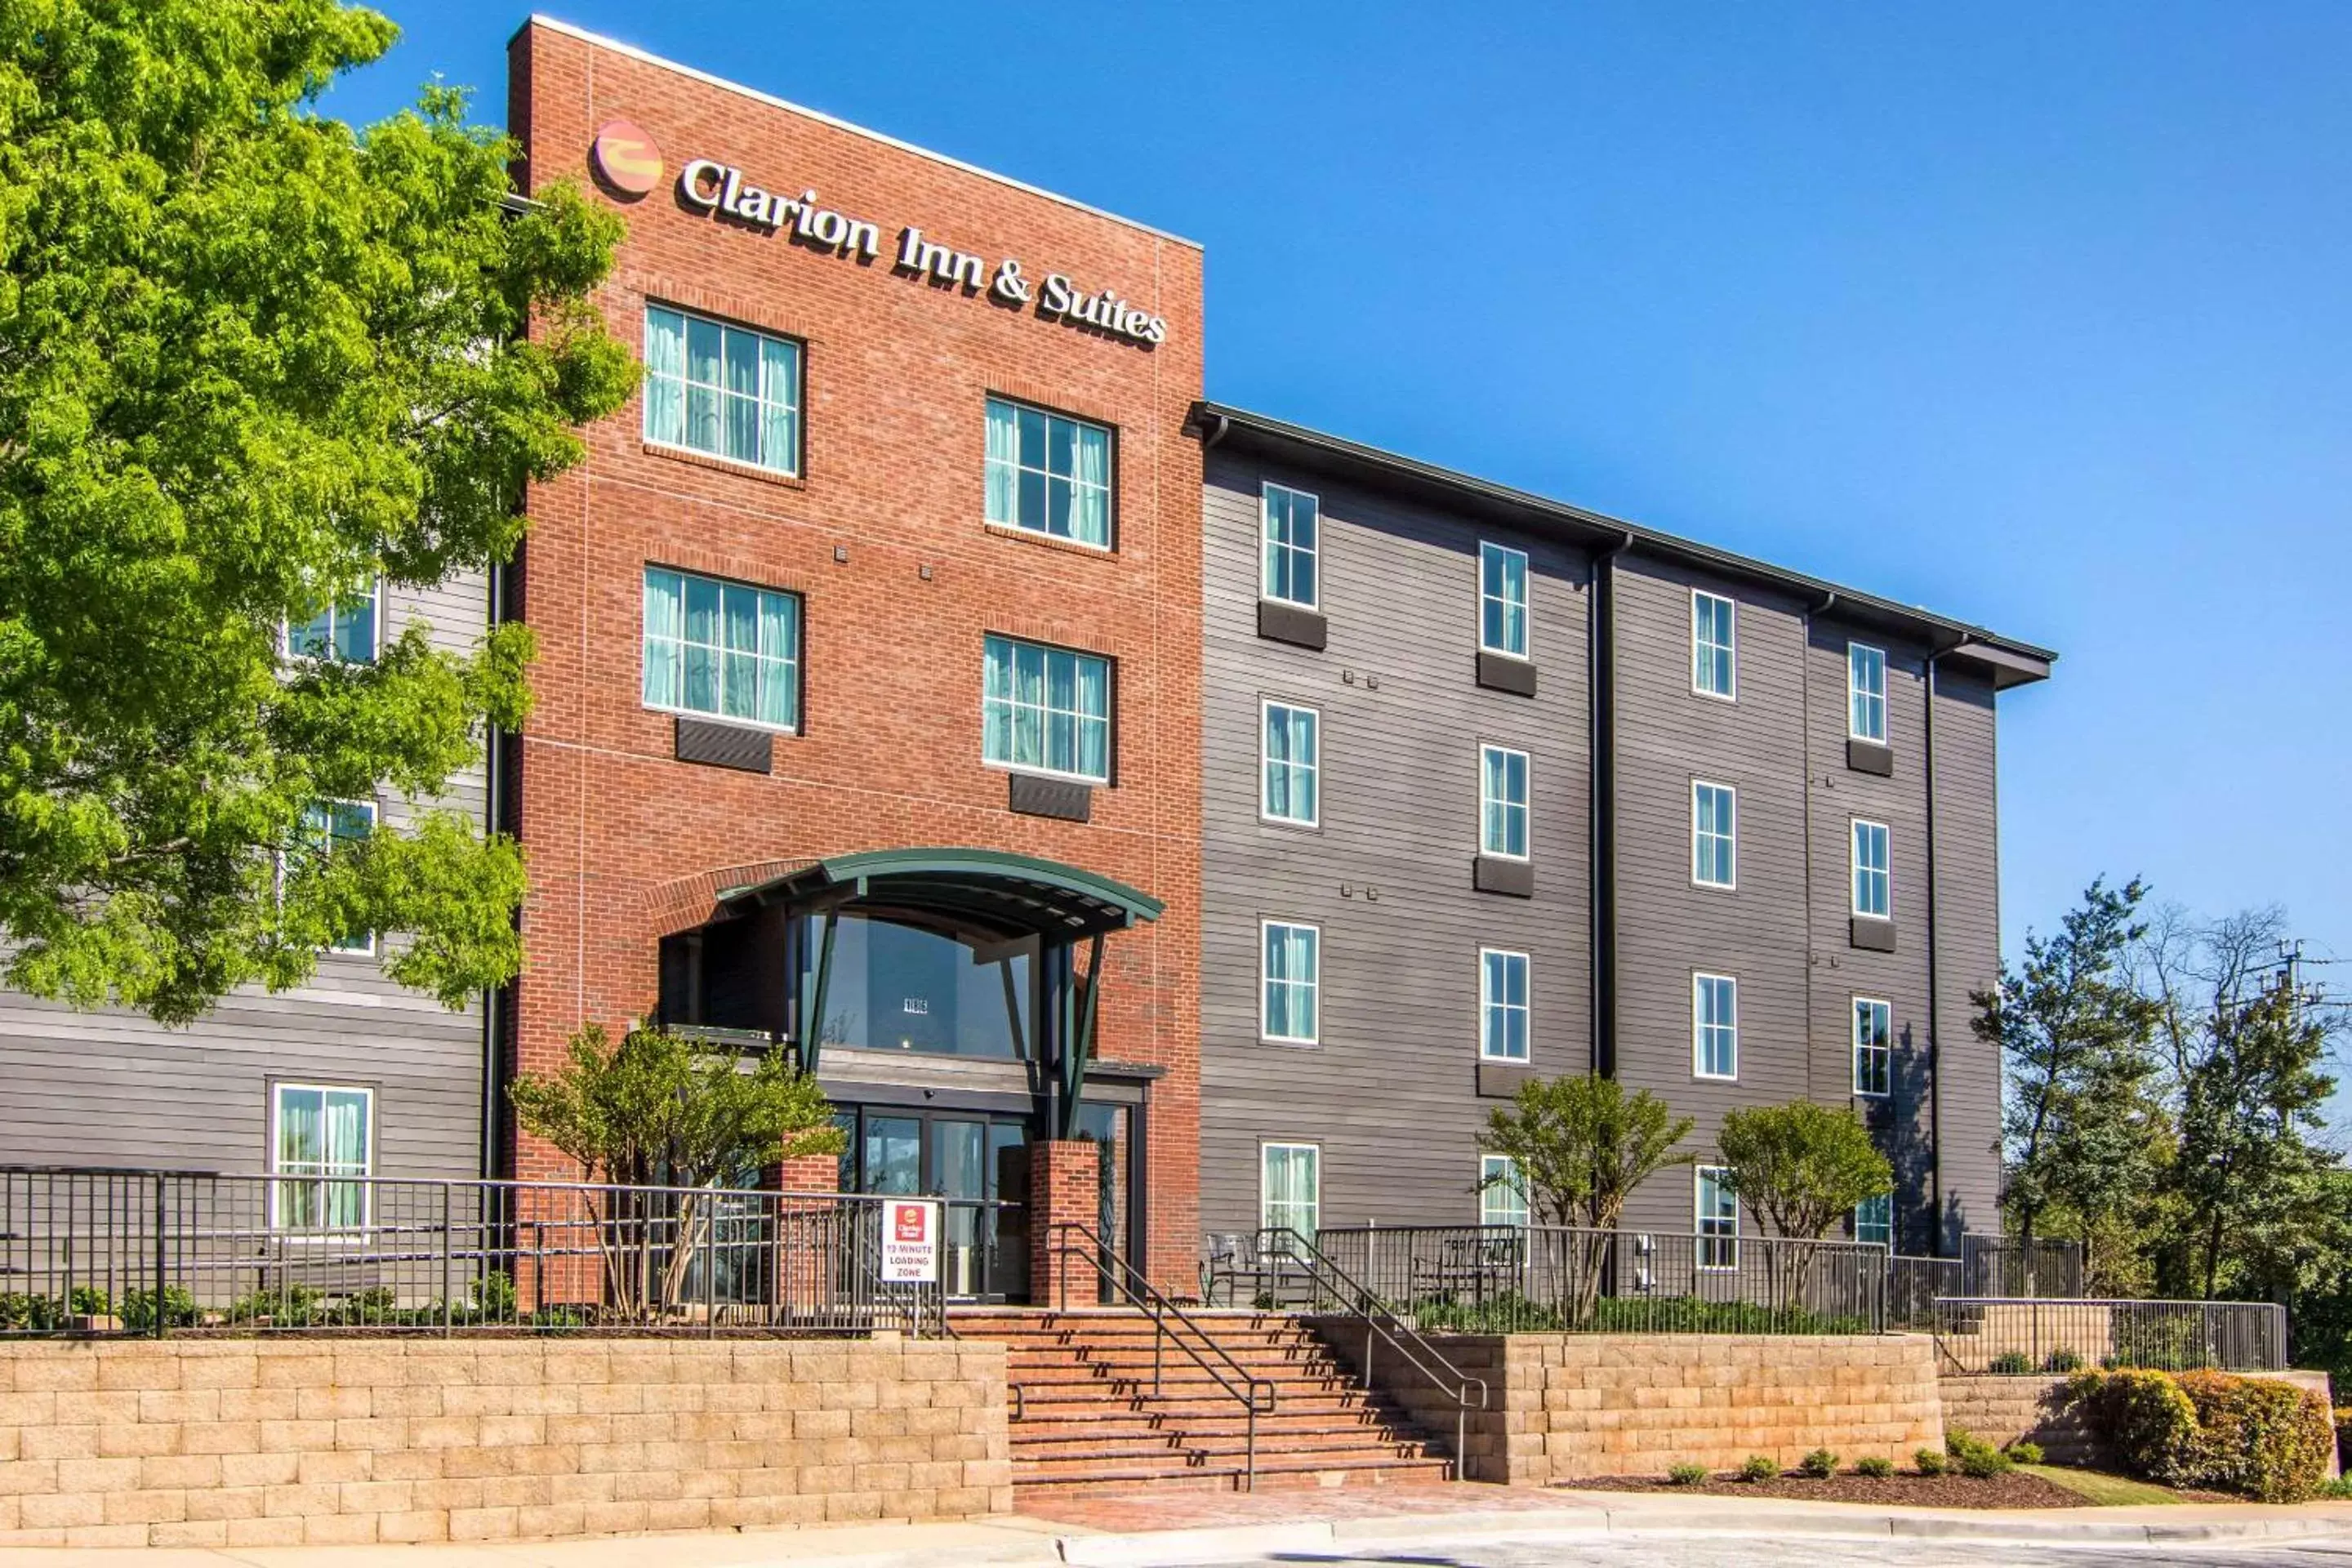 Property building in Clarion Inn & Suites Atlanta Downtown